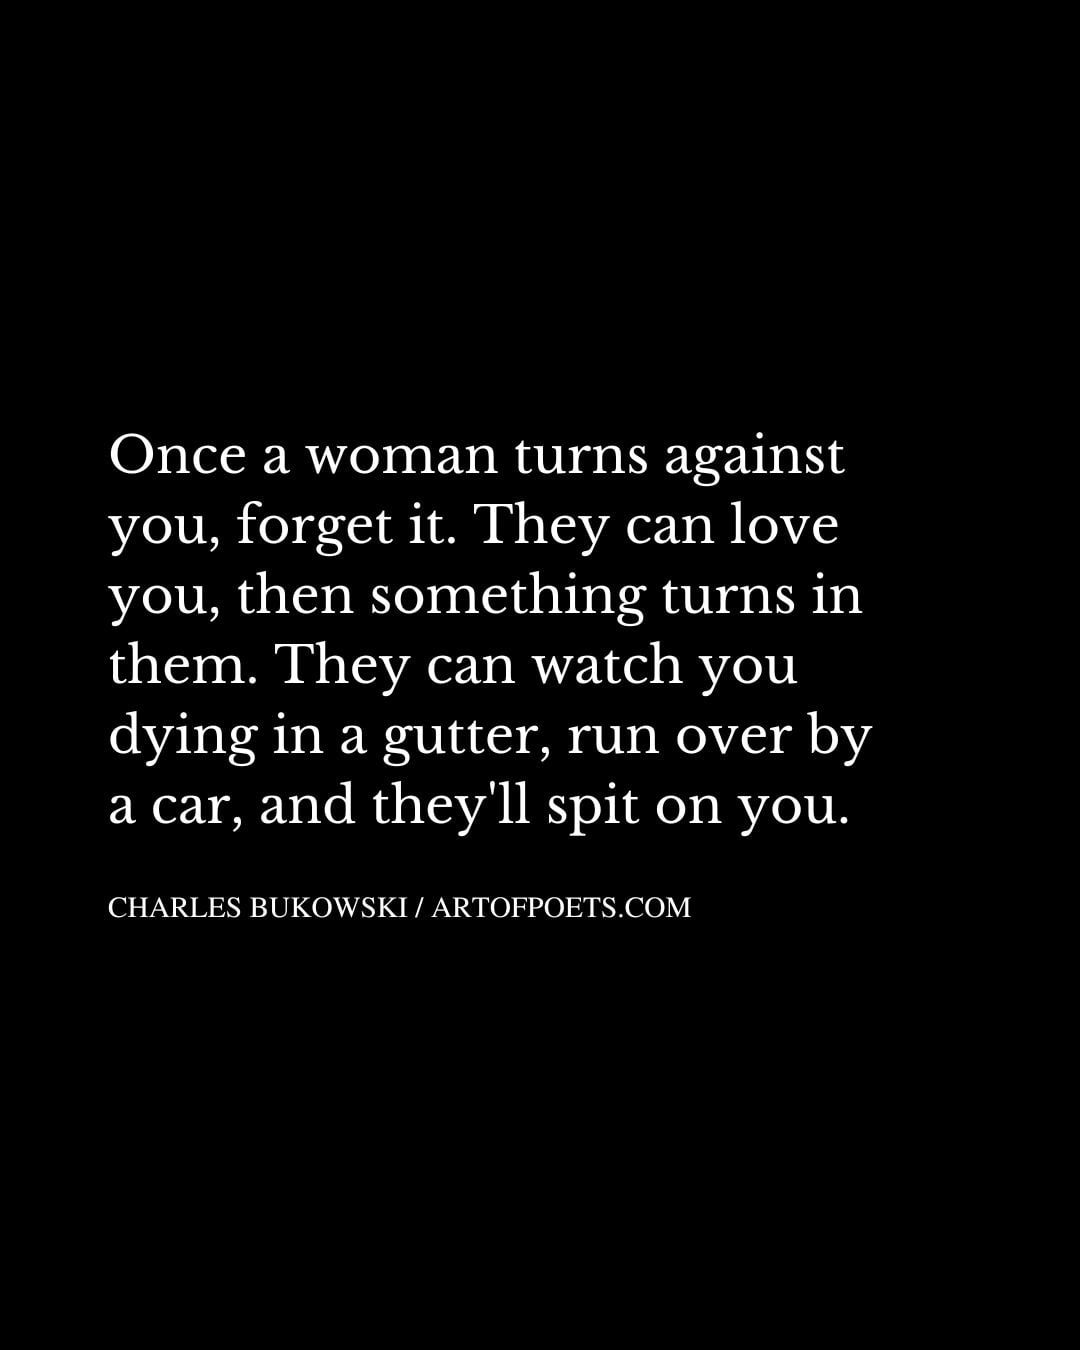 Once a woman turns against you forget it. They can love you then something turns in them